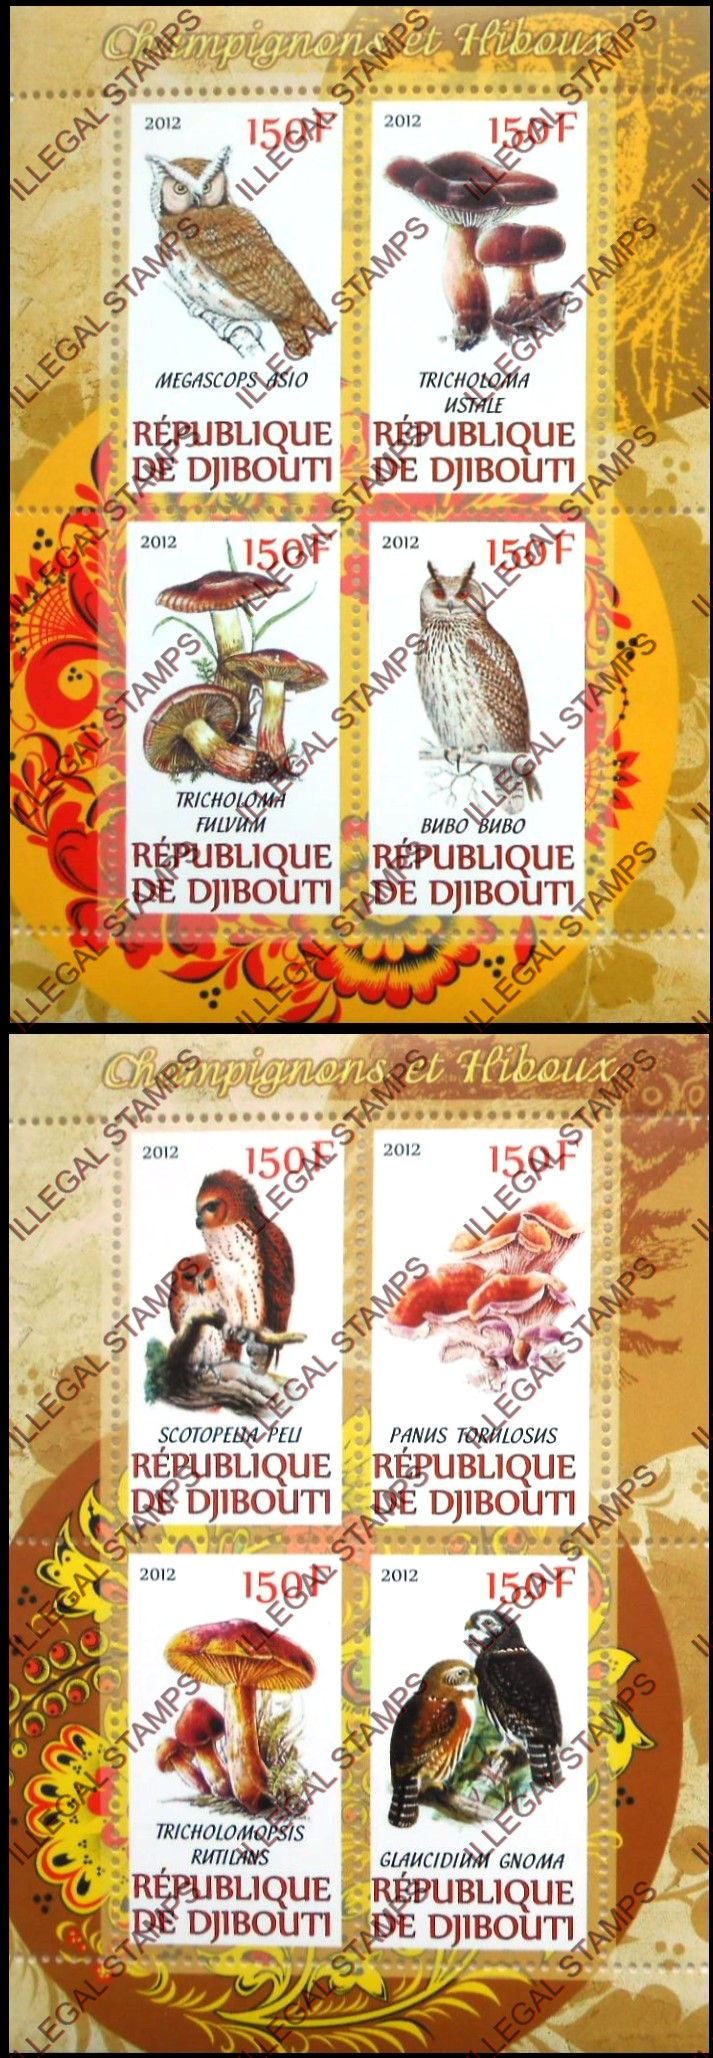 Djibouti 2012 Mushrooms and Owls Illegal Stamp Souvenir Sheets of 4